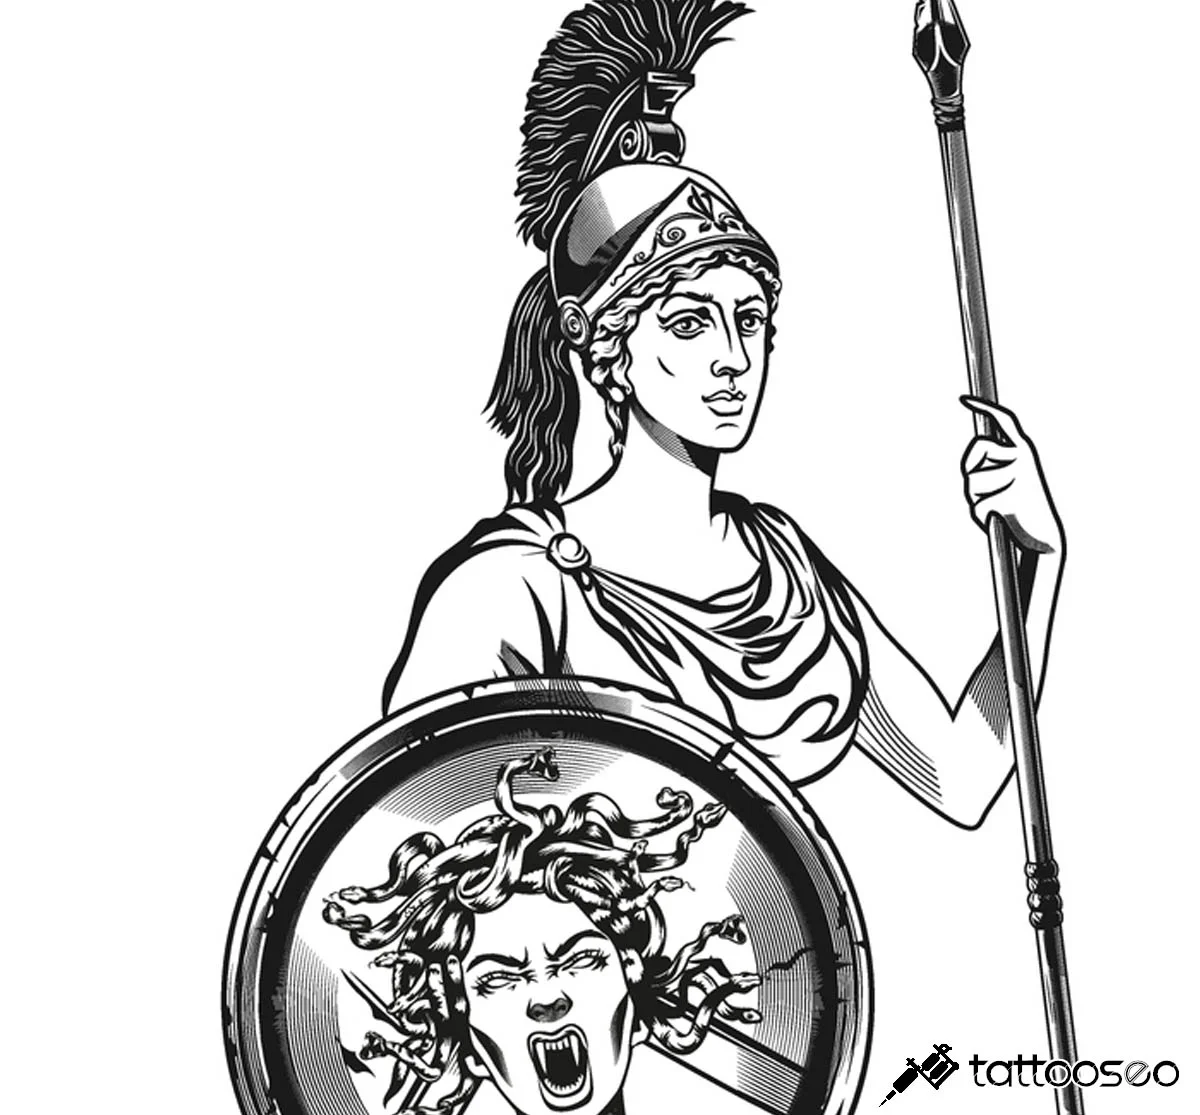 Athena tattoo meaning